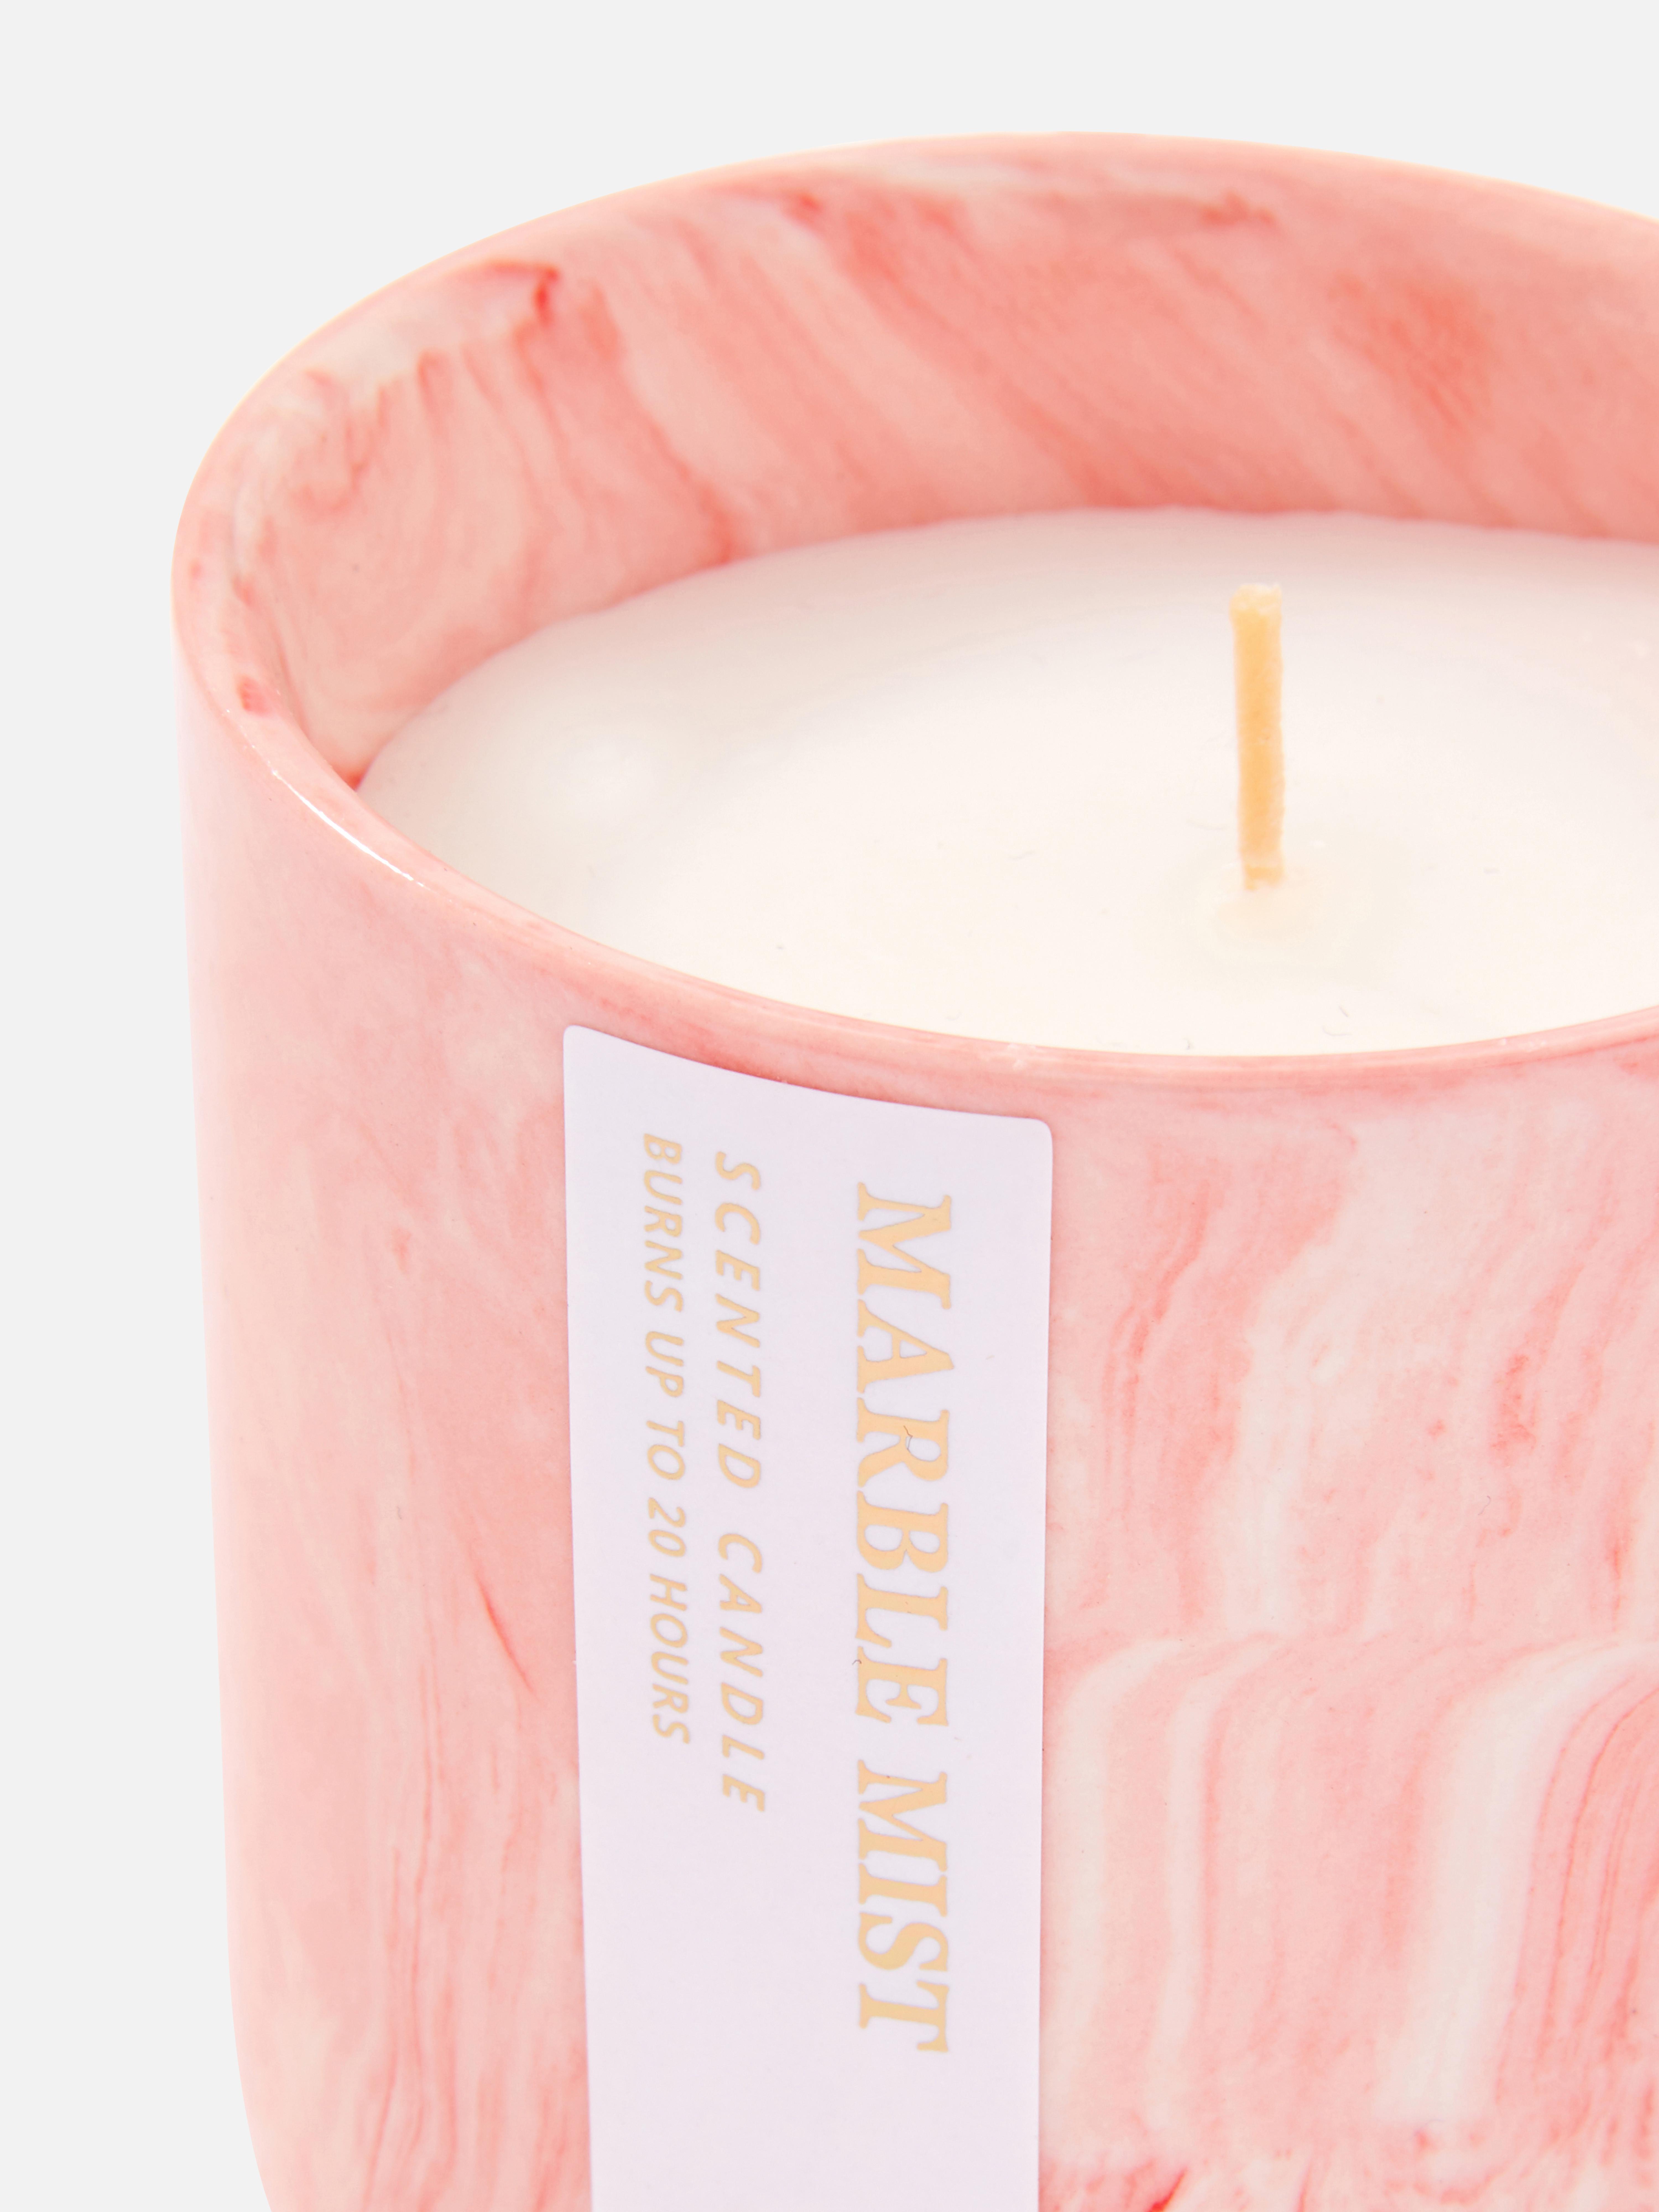 Marble Mist Candle